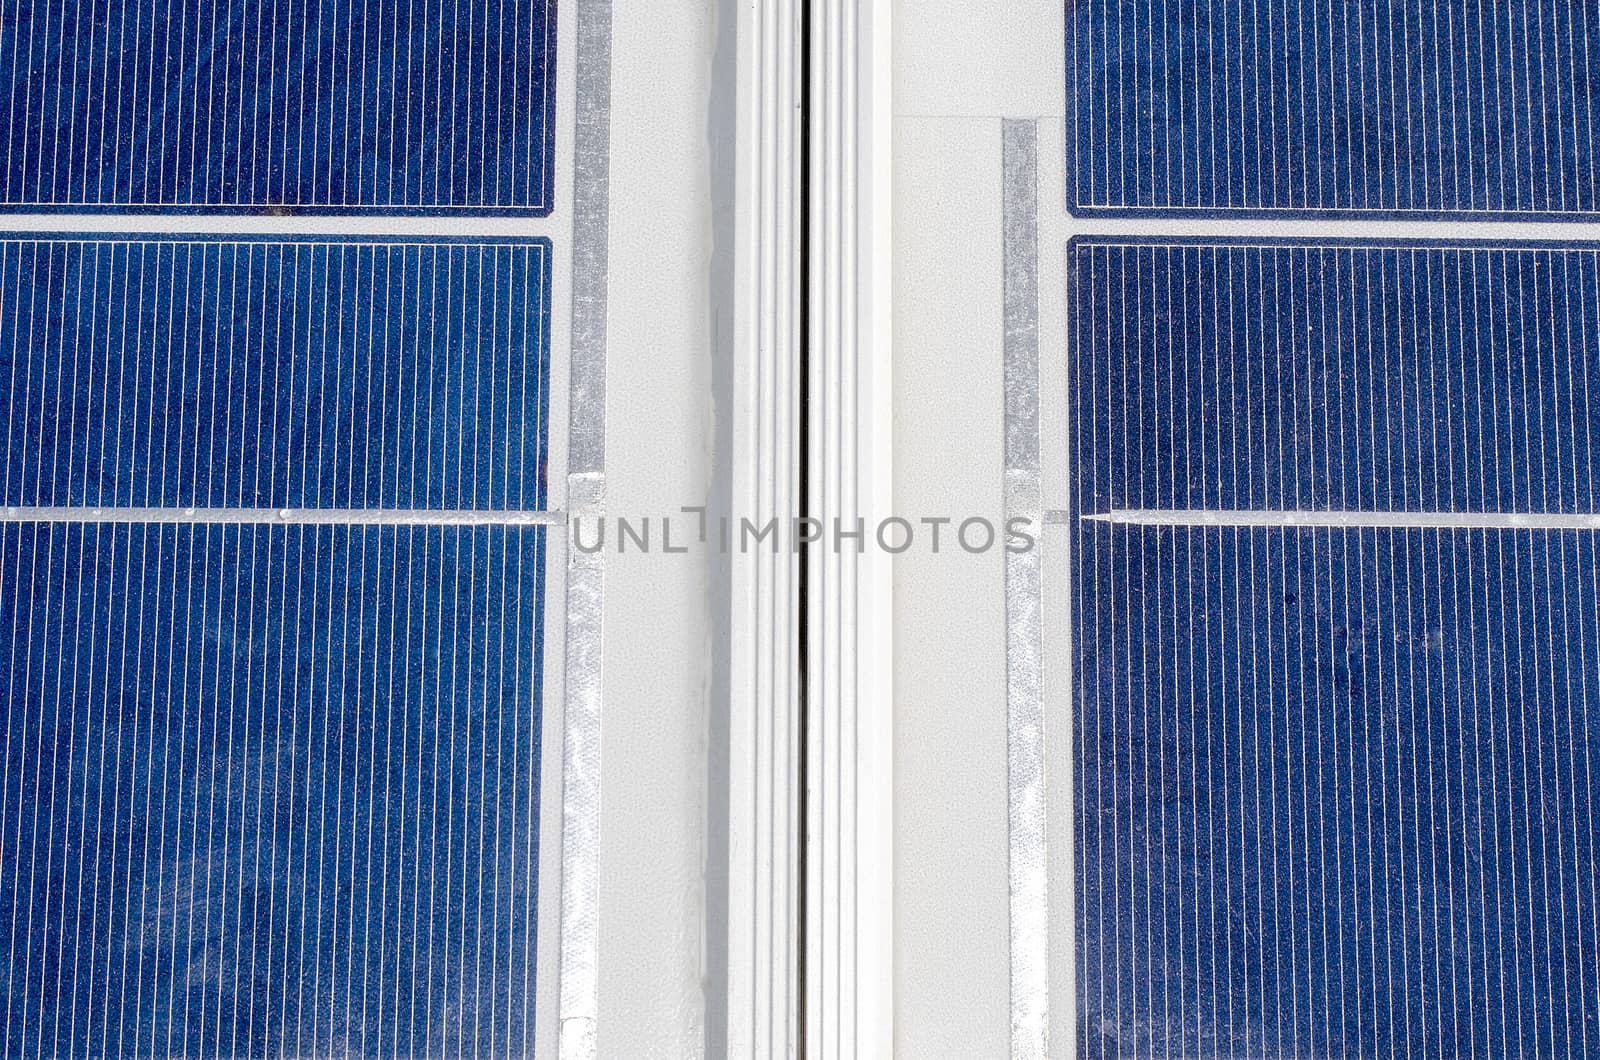 Solar panel and polycrystalline photovoltaic cells by eenevski